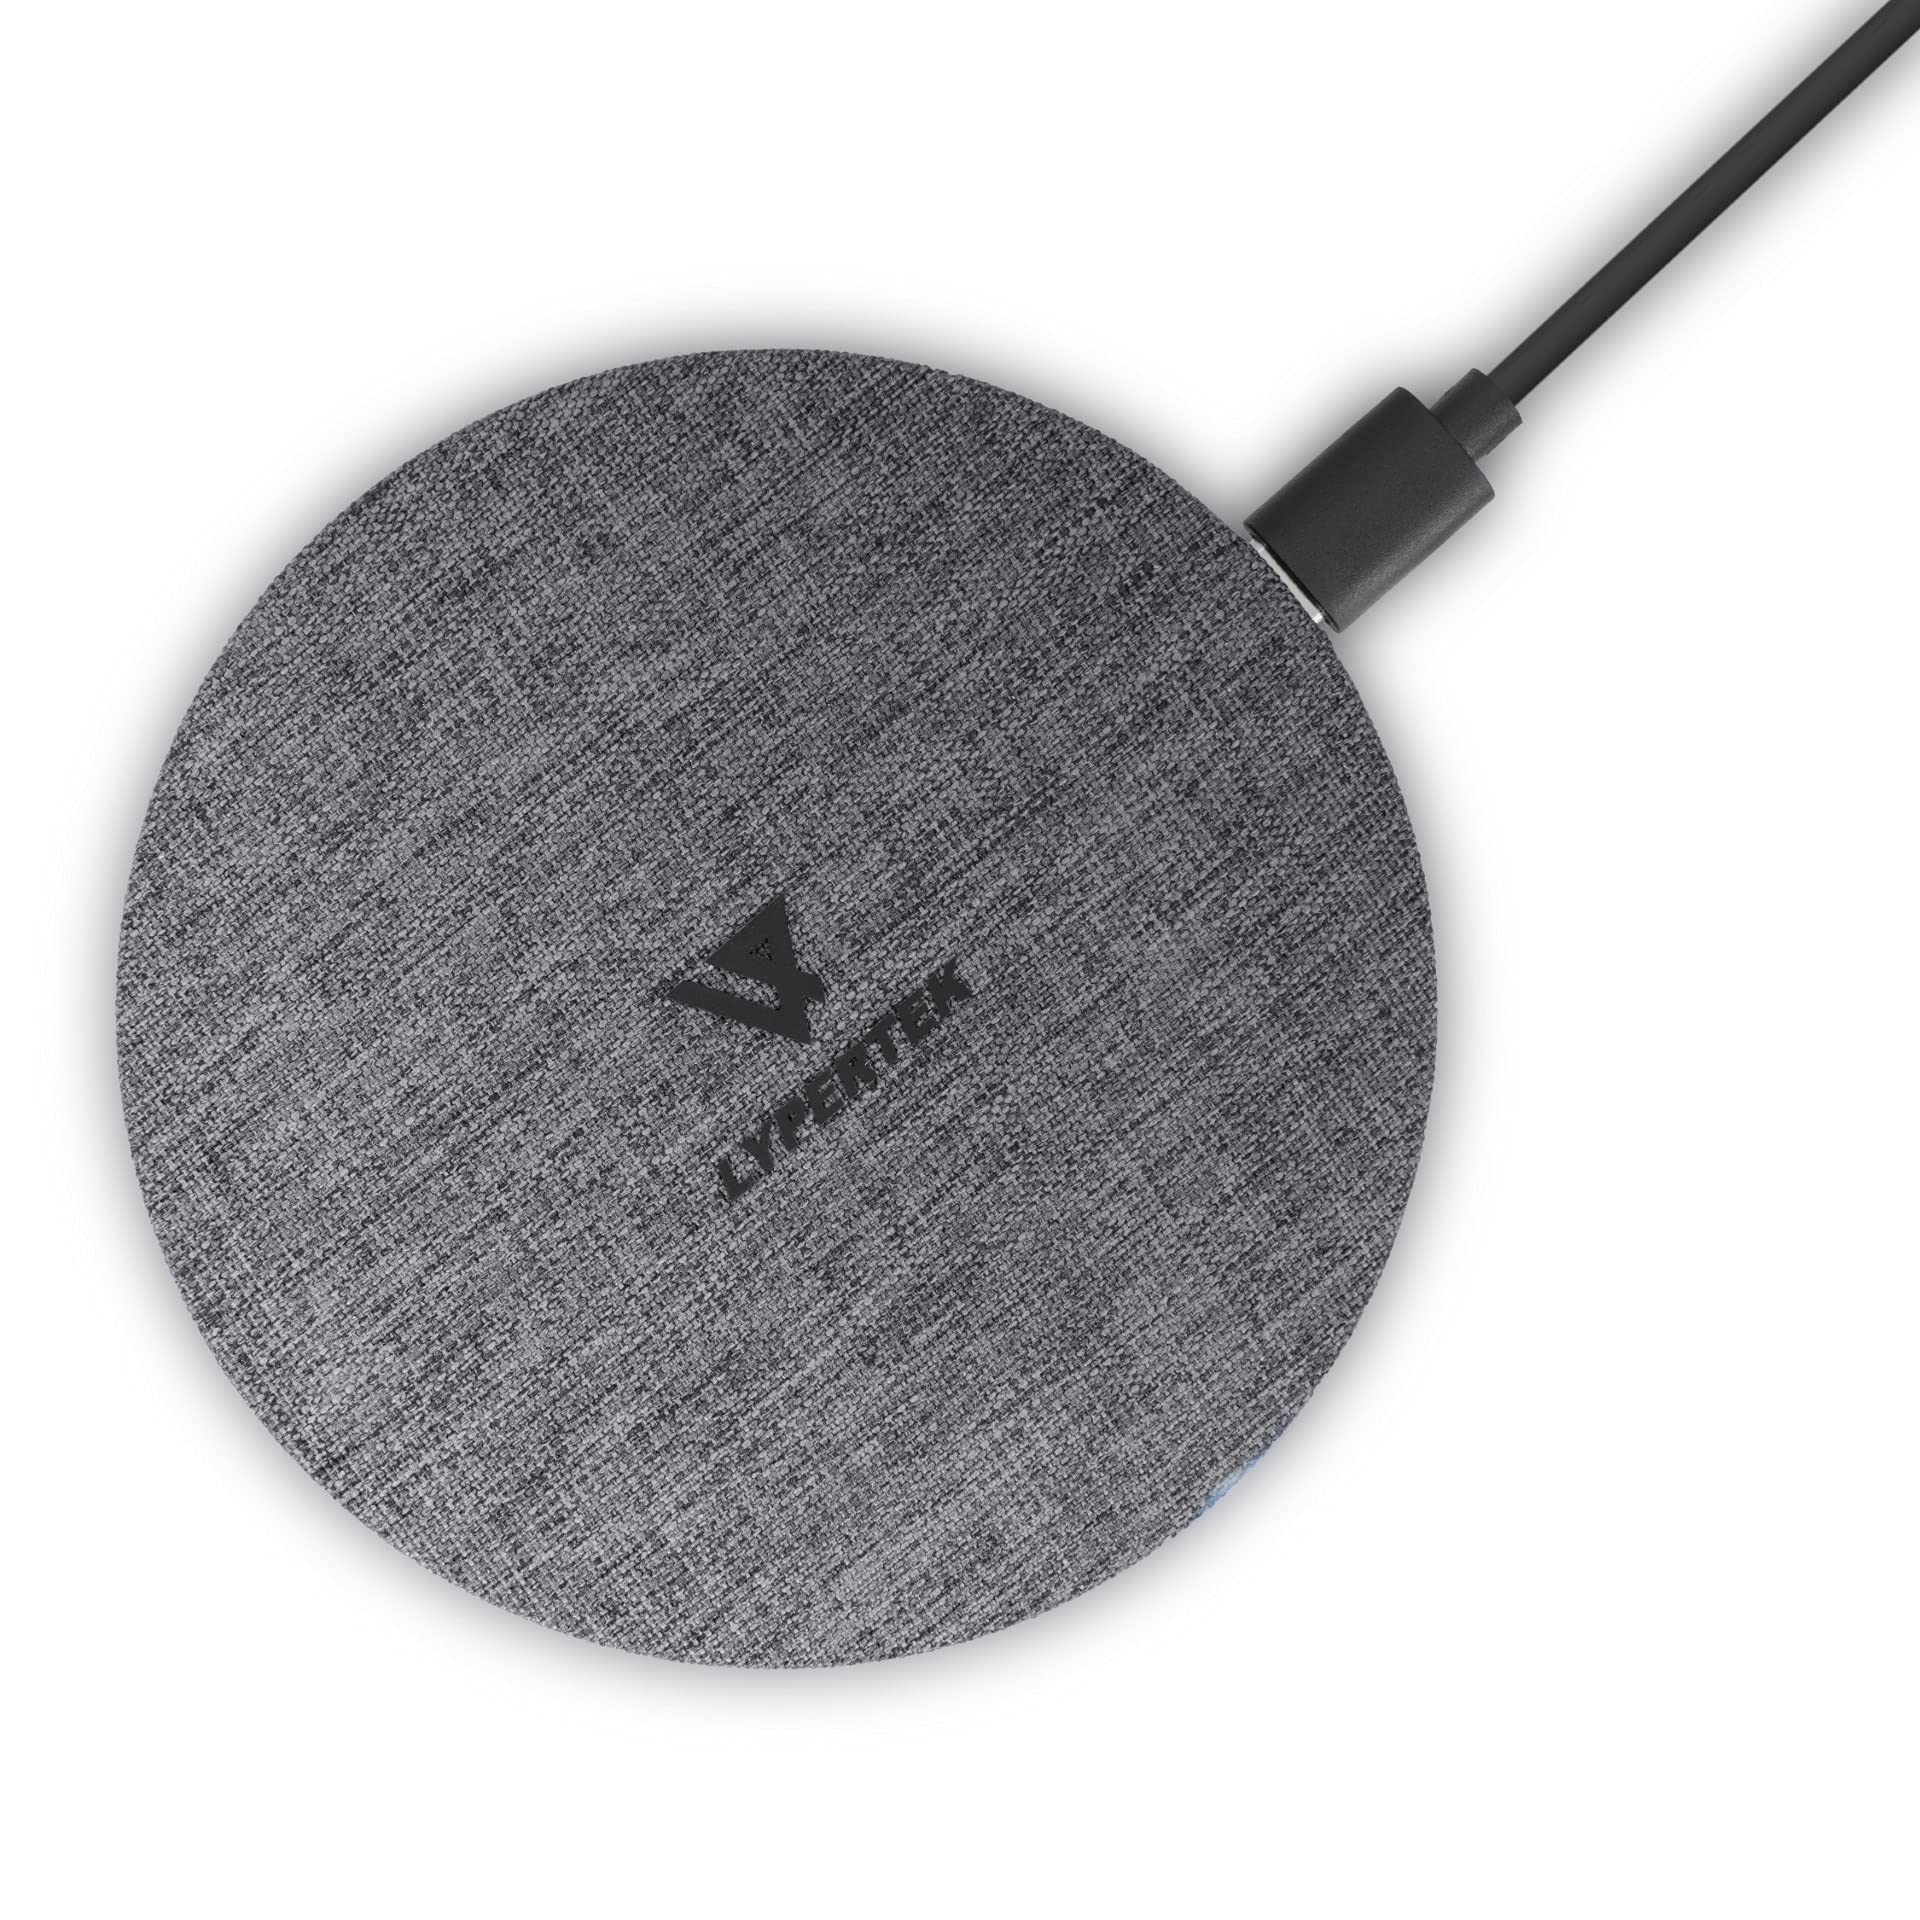 Lypertek Super Slim High Speed Wireless Charging Pad, Qi-Certified 15W Max with Rapid Charge for Supported Earphones, Headphones, Smartphones and Smart Watches.